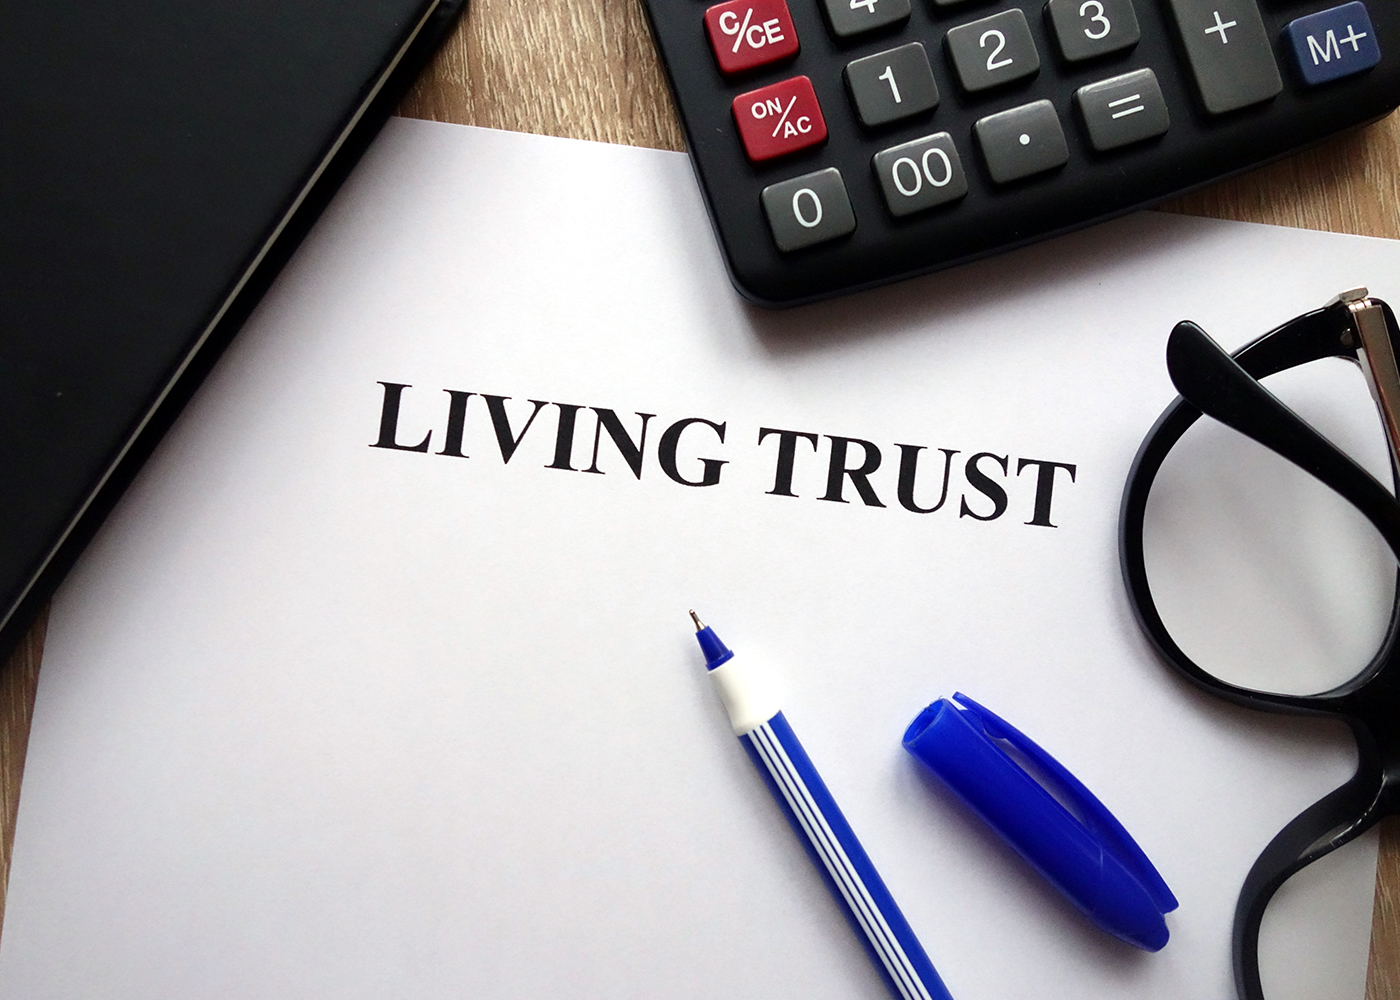 What Is a Living Trust?